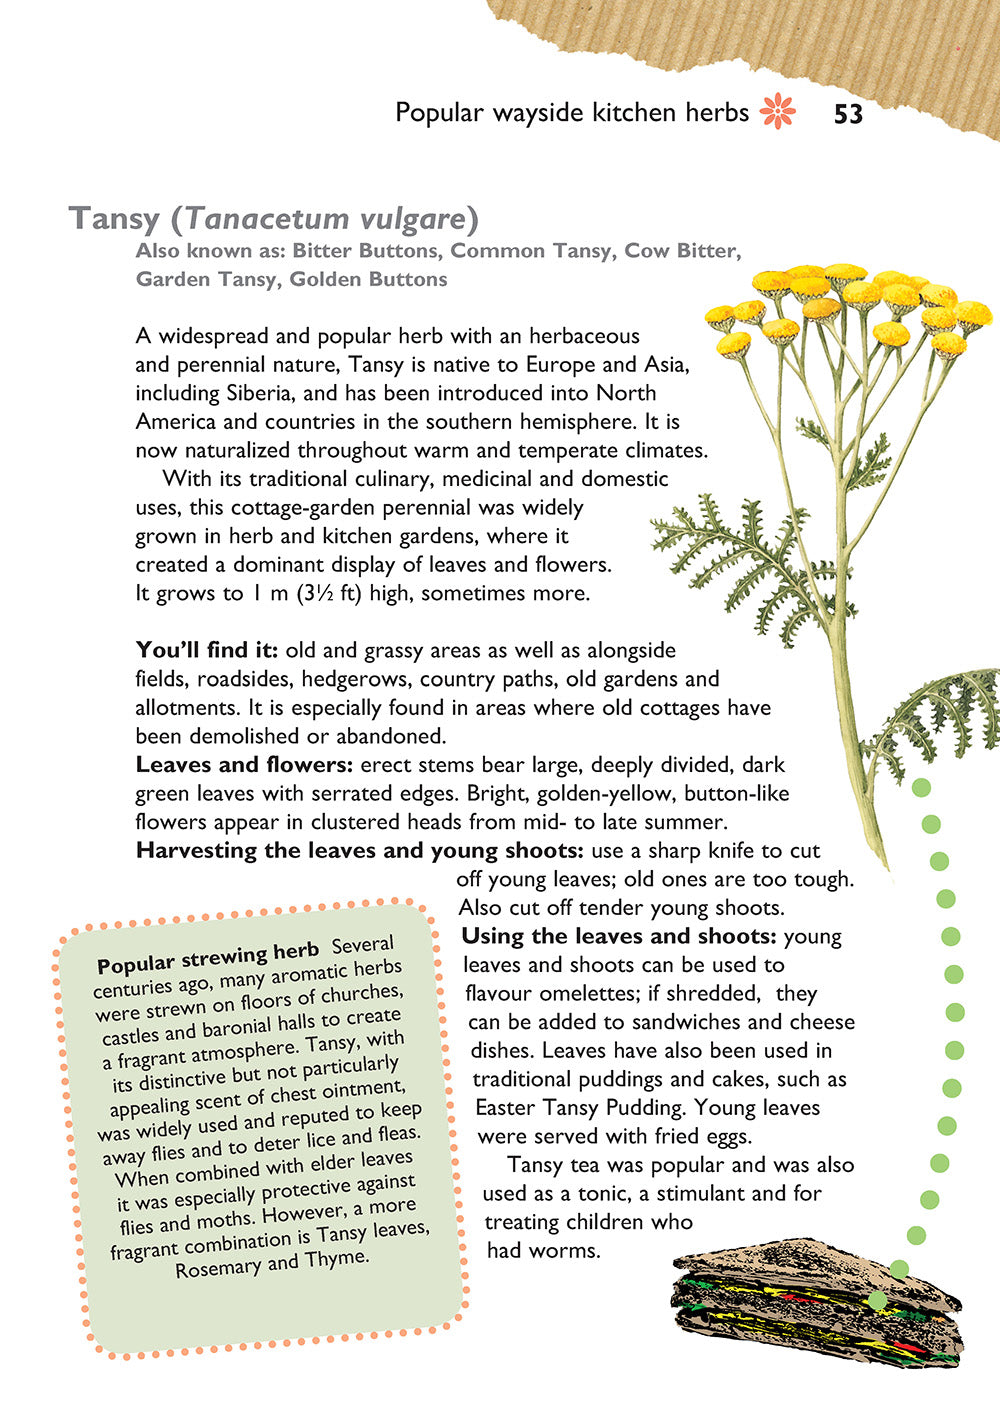 Self-Sufficiency: Foraging for Wild Foods